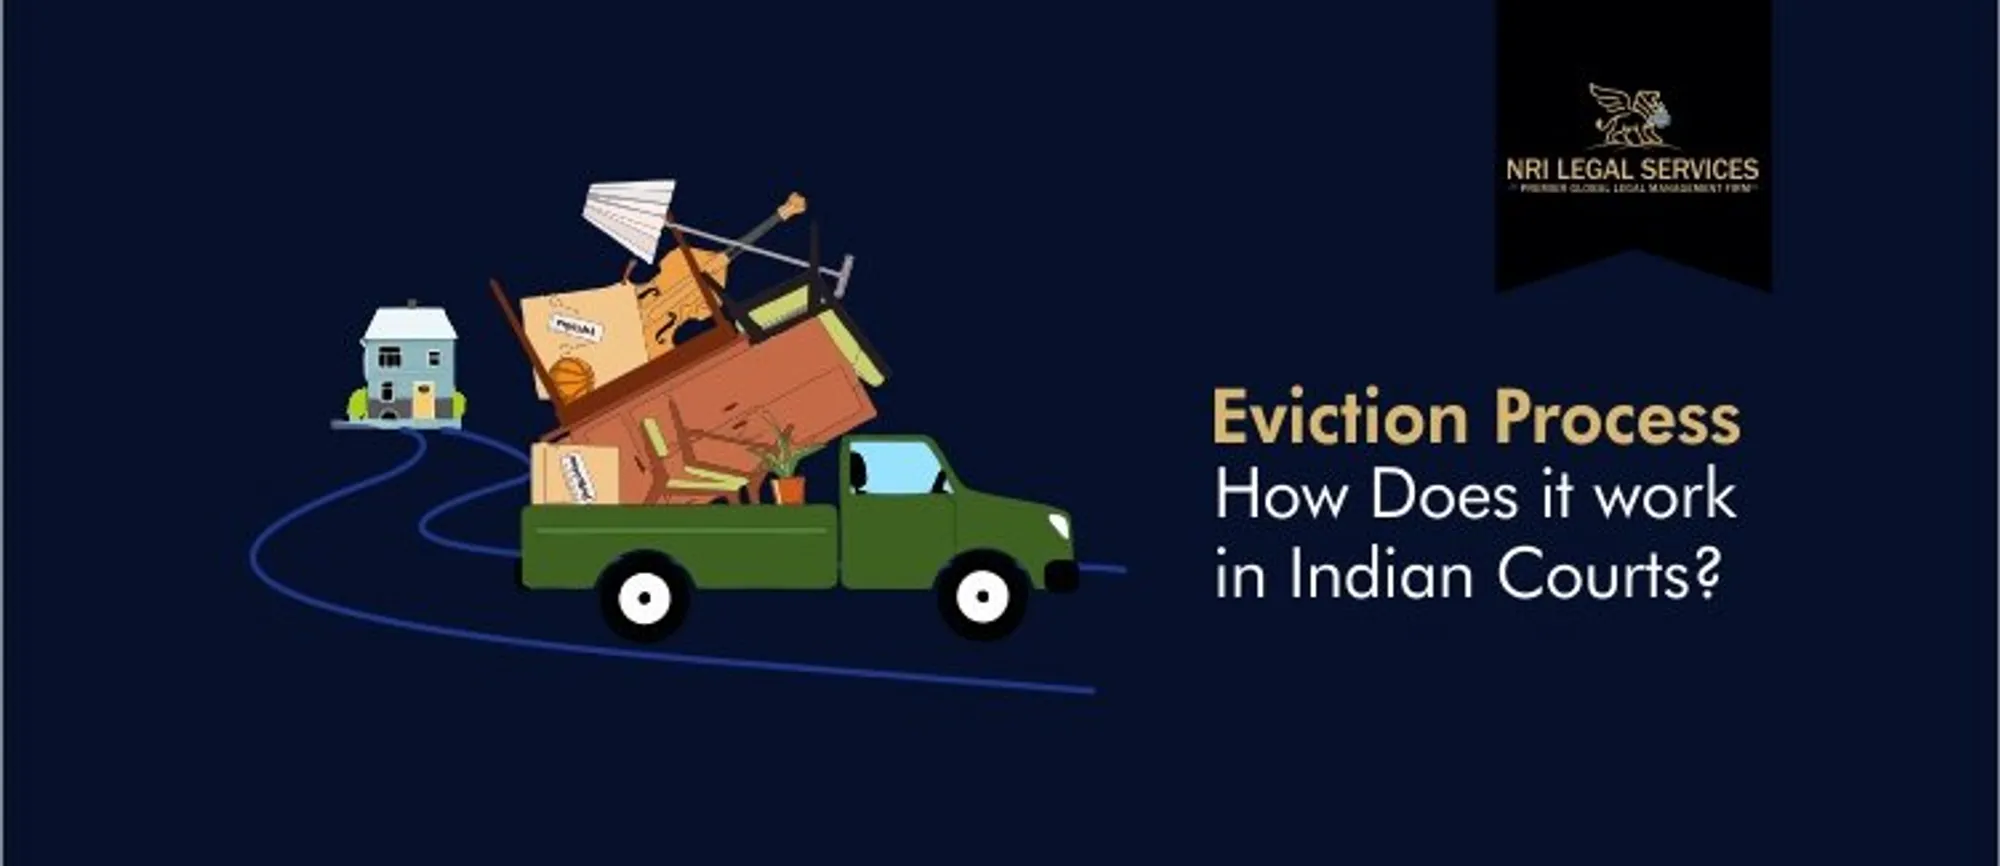 Steps of the Eviction Process How Does Eviction Work in Indian Courts